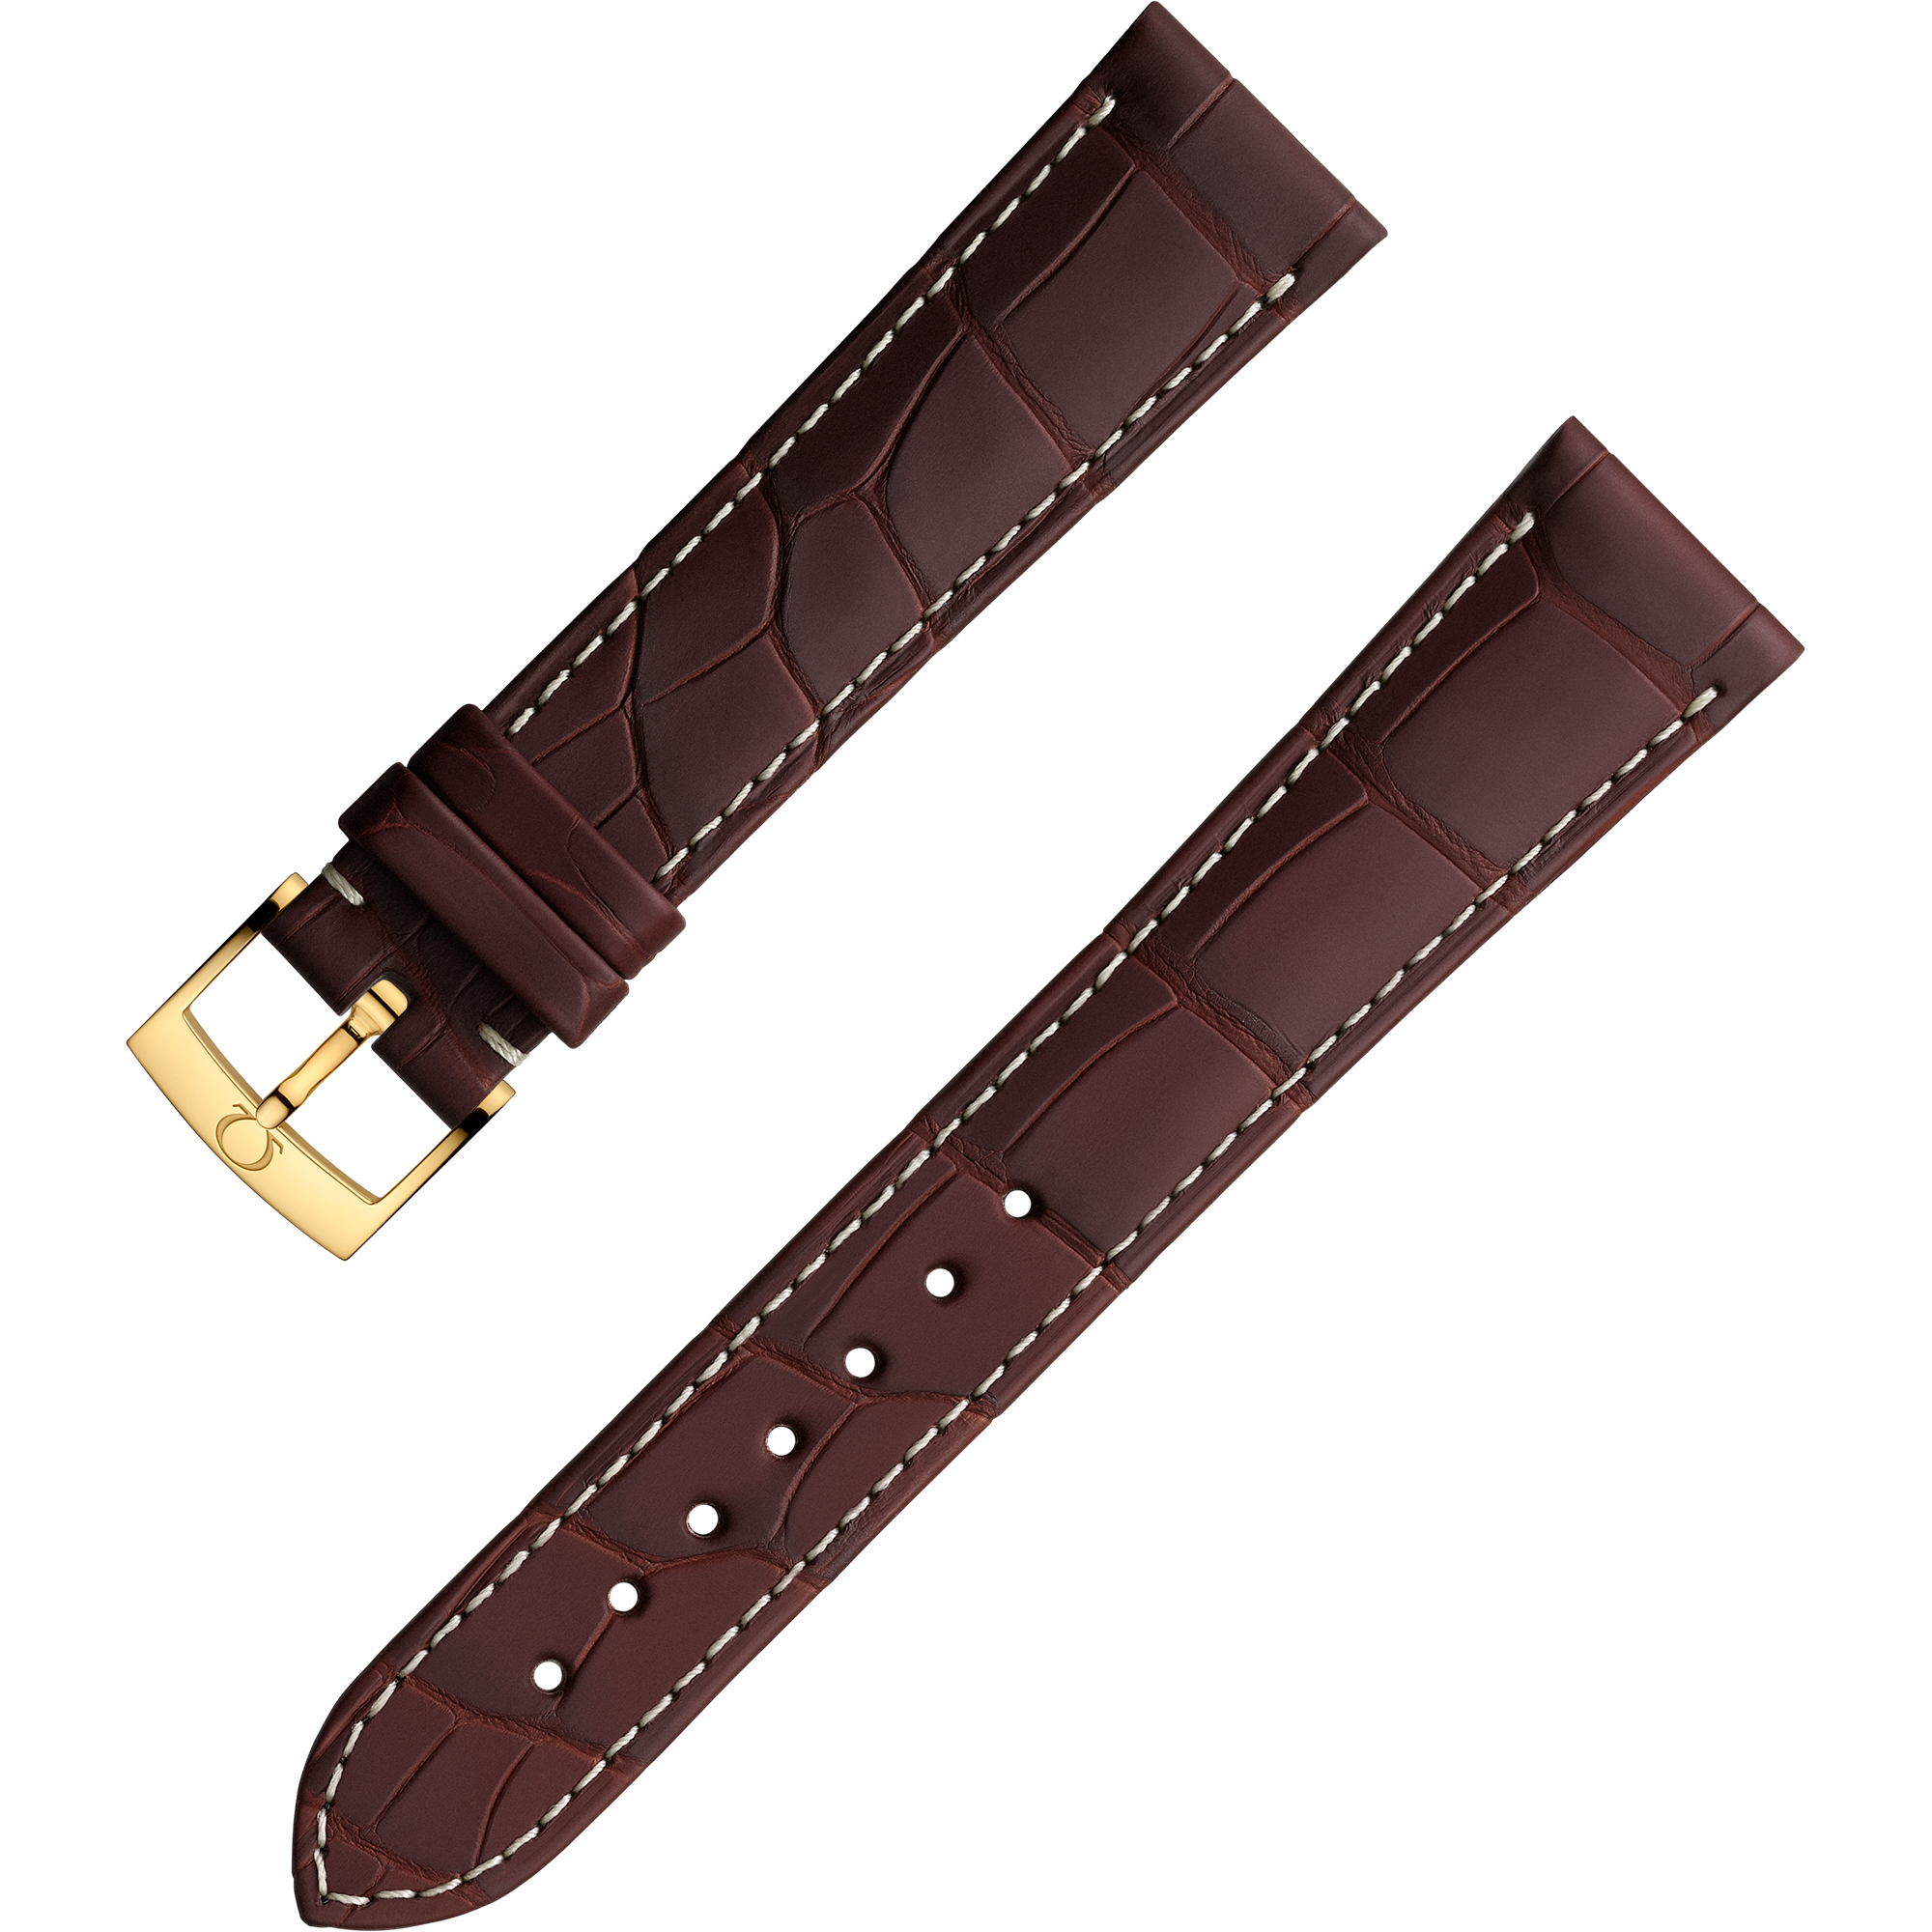 Two-piece strap - Brown alligator leather strap with pin buckle - 032CUZ003330